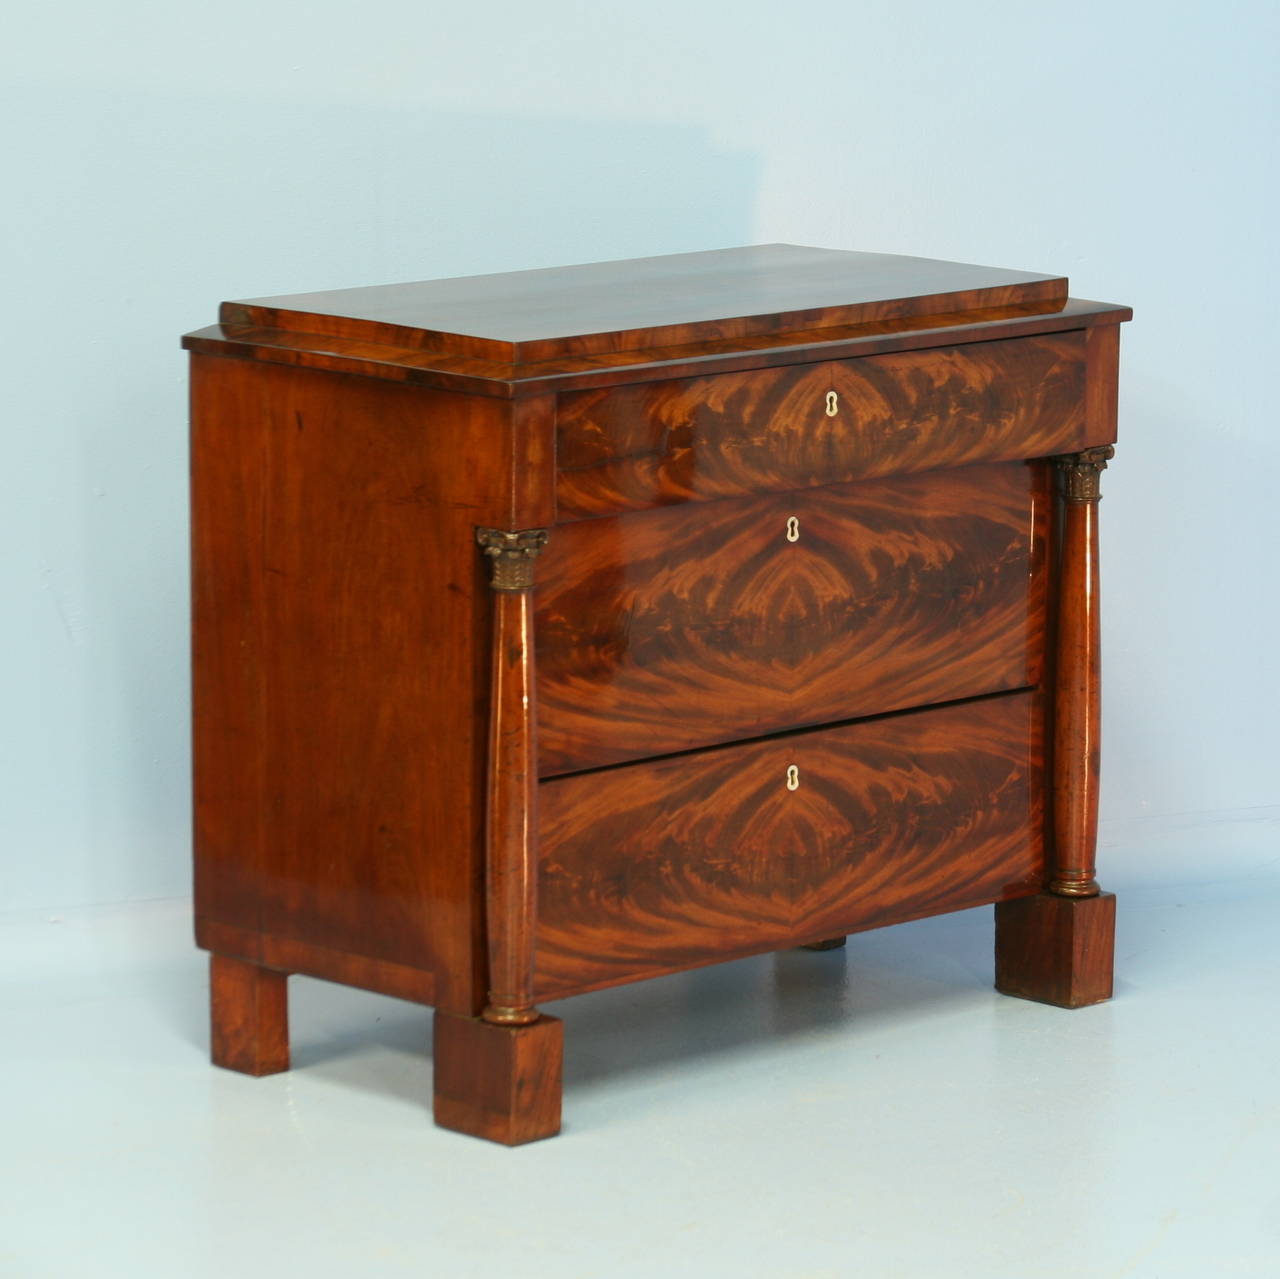 The  mahogany in this chest of drawers is striking. Please examine the close up photos to appreciate the deep color and beauty of the wood. The turned column details add a classic touch to the clean lines of this formal Biedermeier chest of drawers.